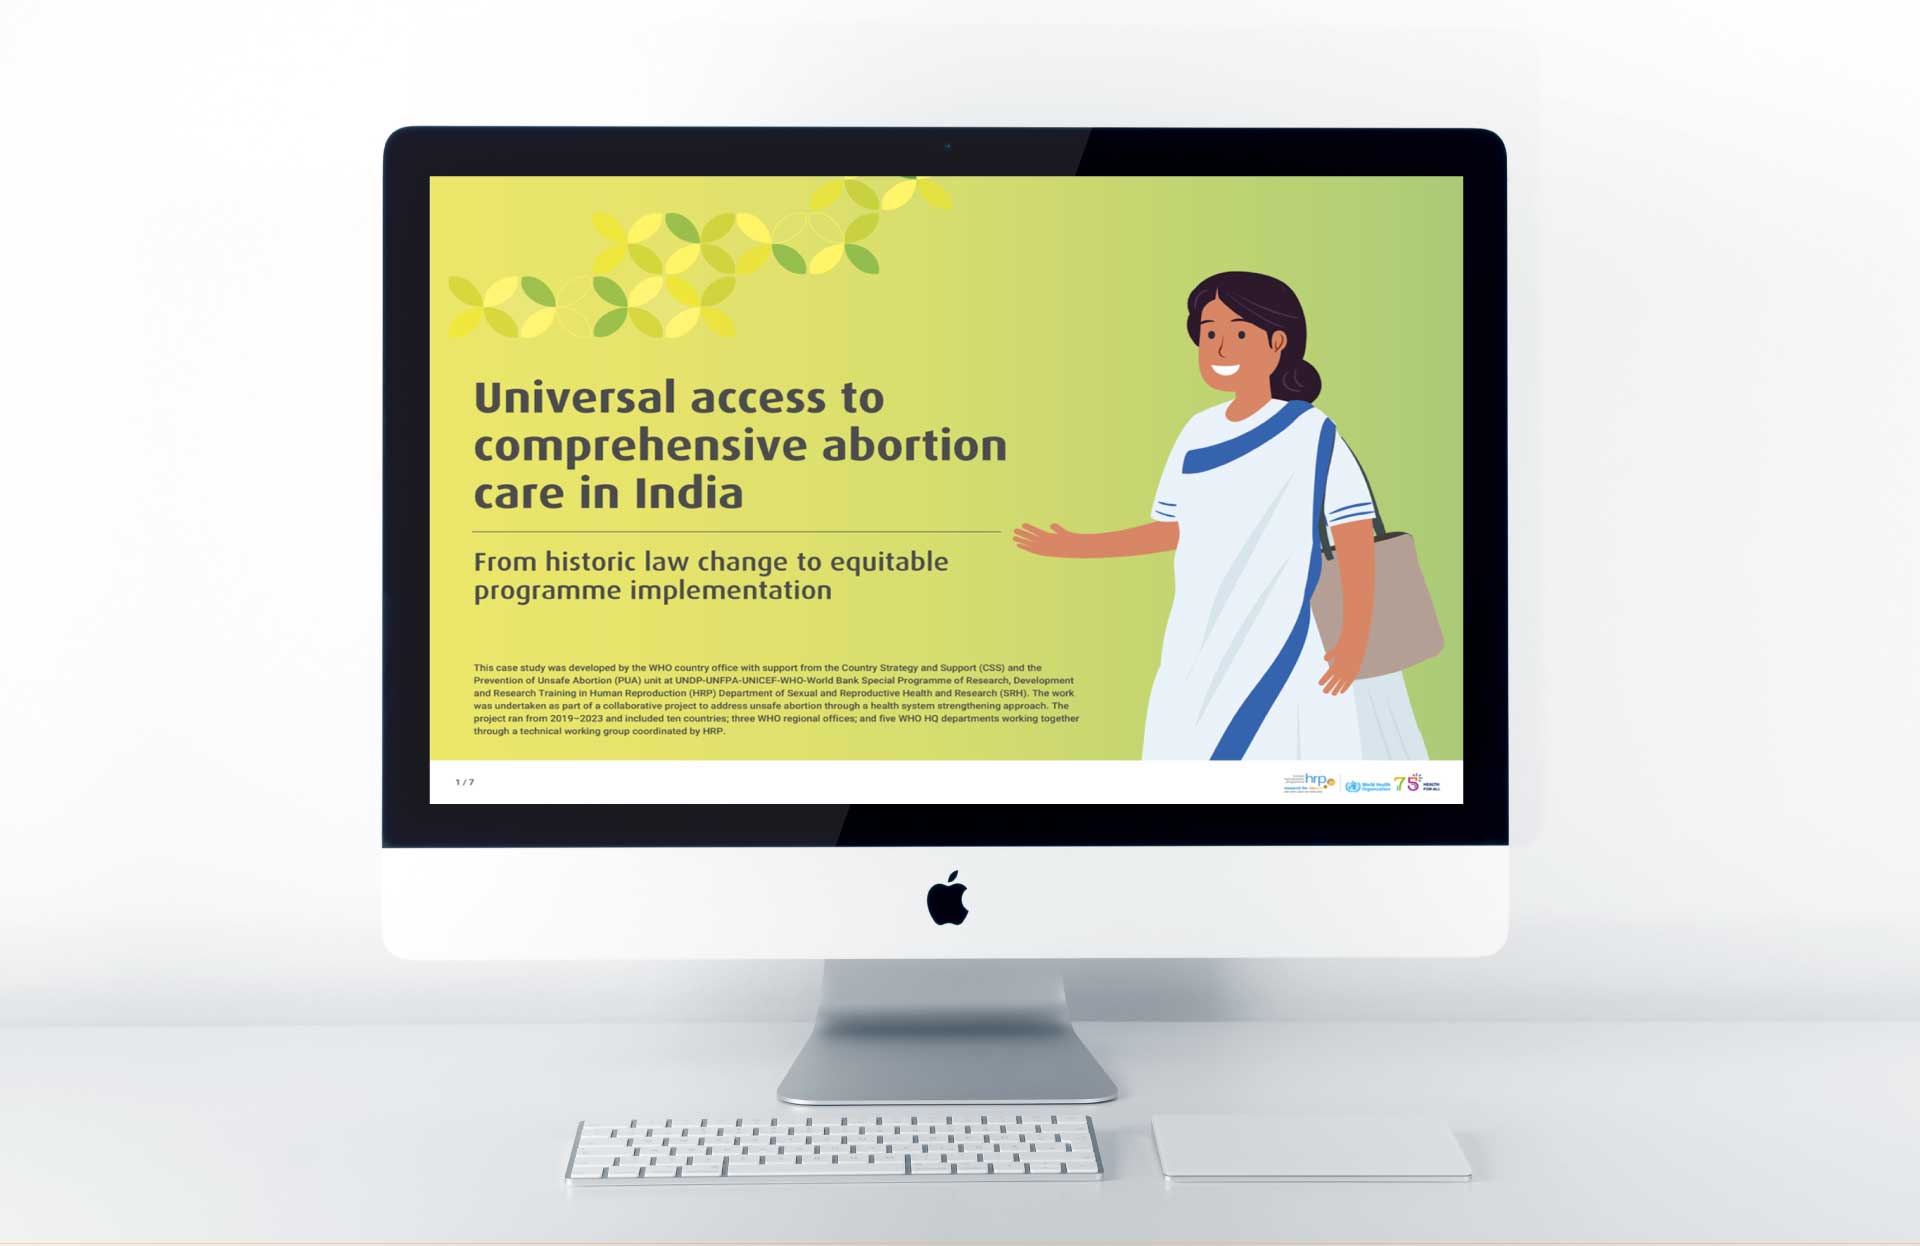 Universal access to comprehensive abortion care in India